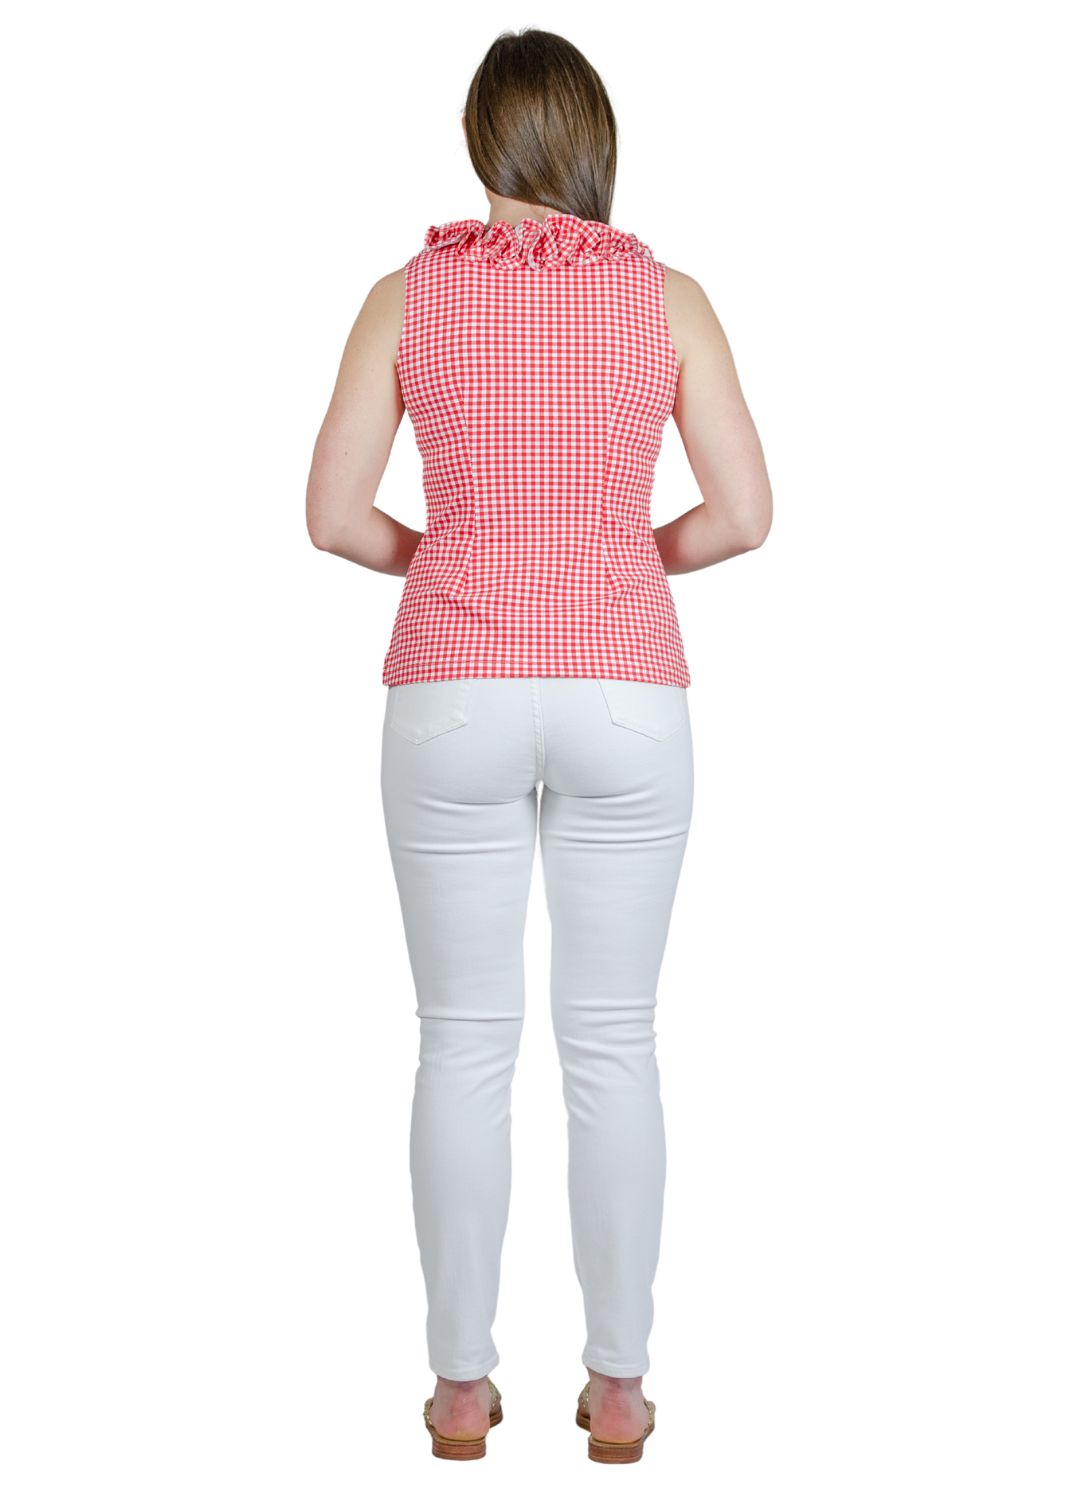 Cricket Sleeveless Top - Gingham Check Red/White-2